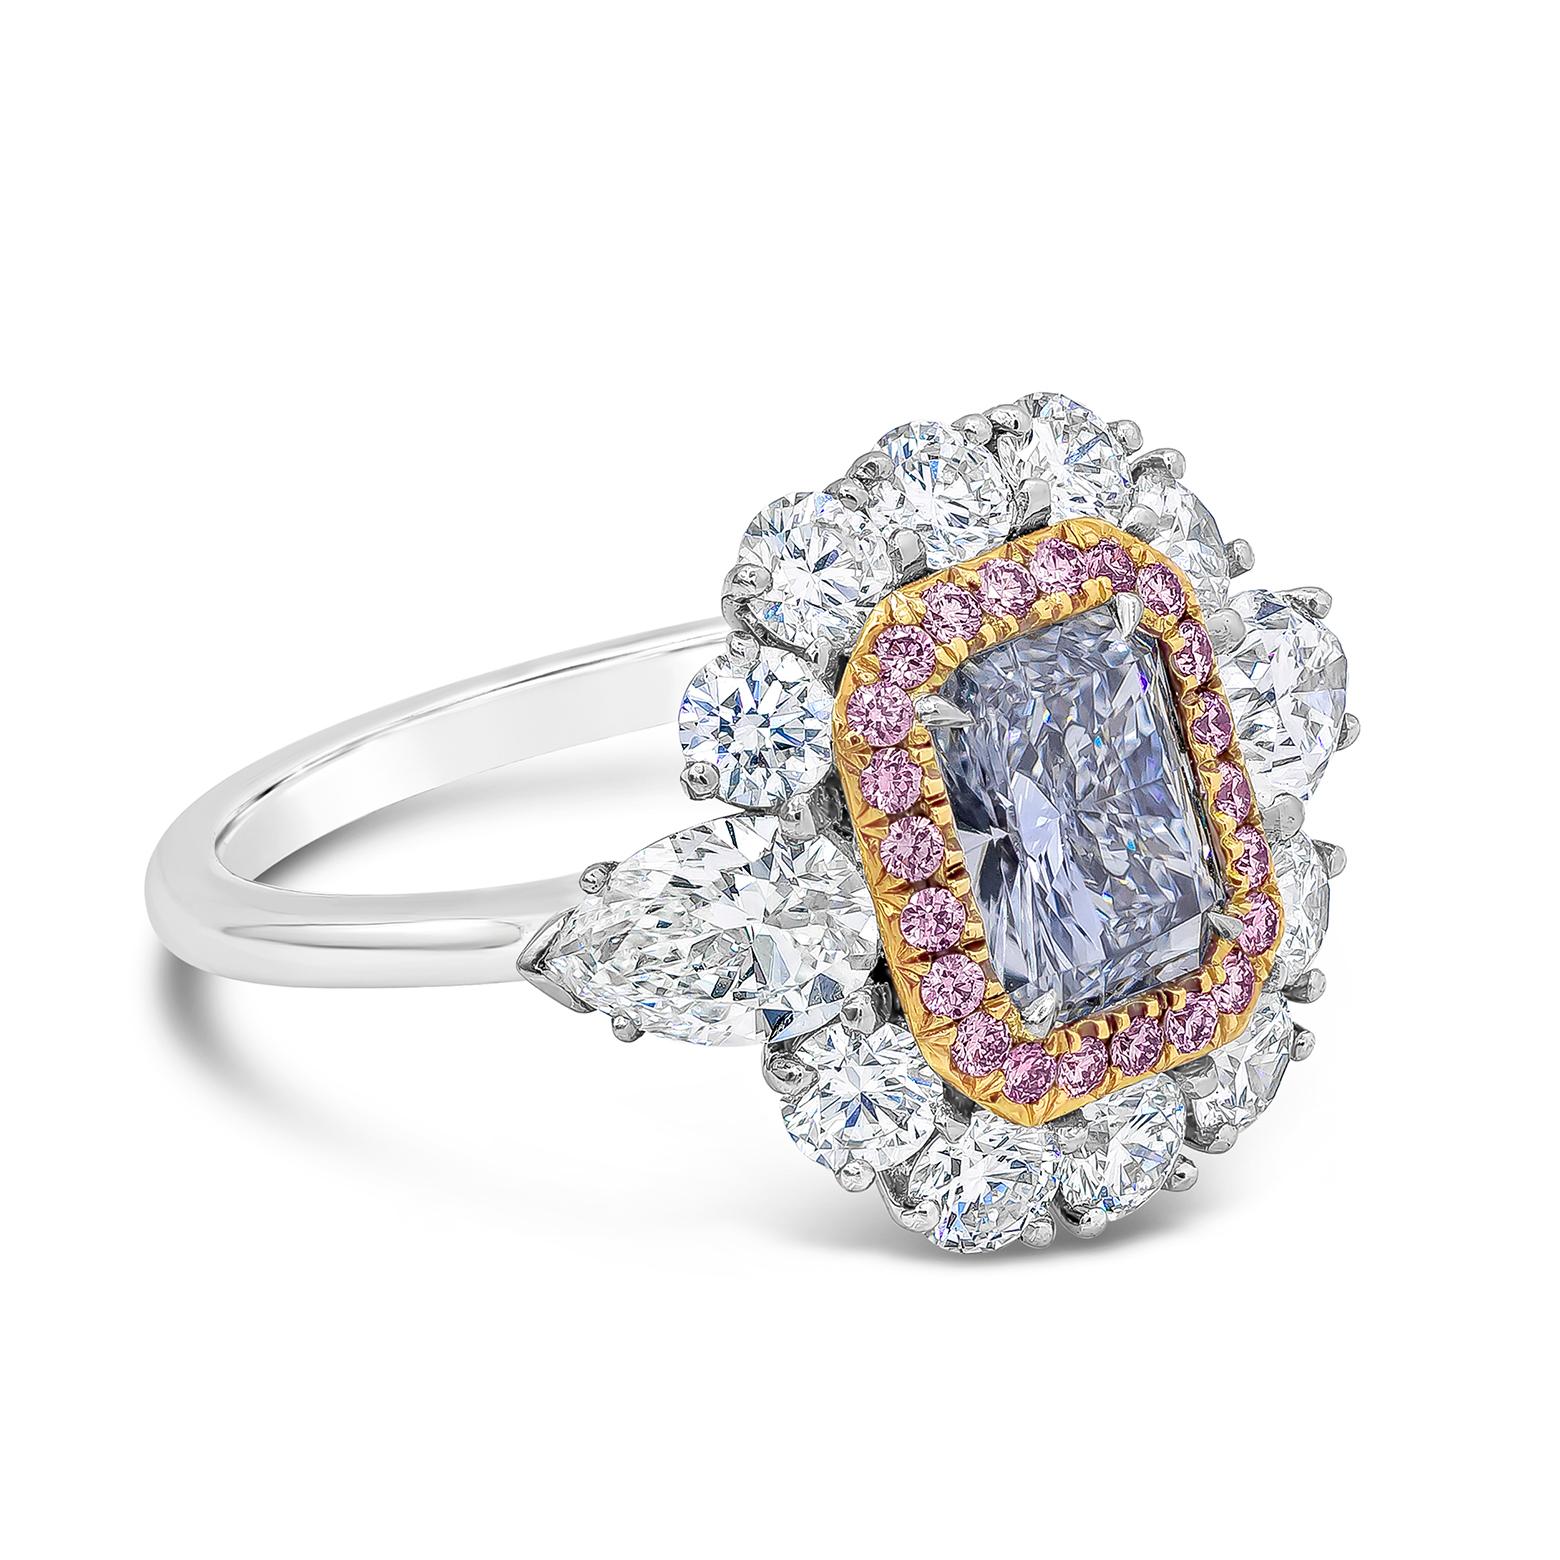 A color-rich and chic engagement ring showcasing a GIA Certified 1.09 carat radiant cut blue diamond, Fancy Light Blue Color, VS1 in Clarity. Surrounding the center stone are pink diamonds weighing 0.21 carats total, VS in Clarity, set in 18K Yellow